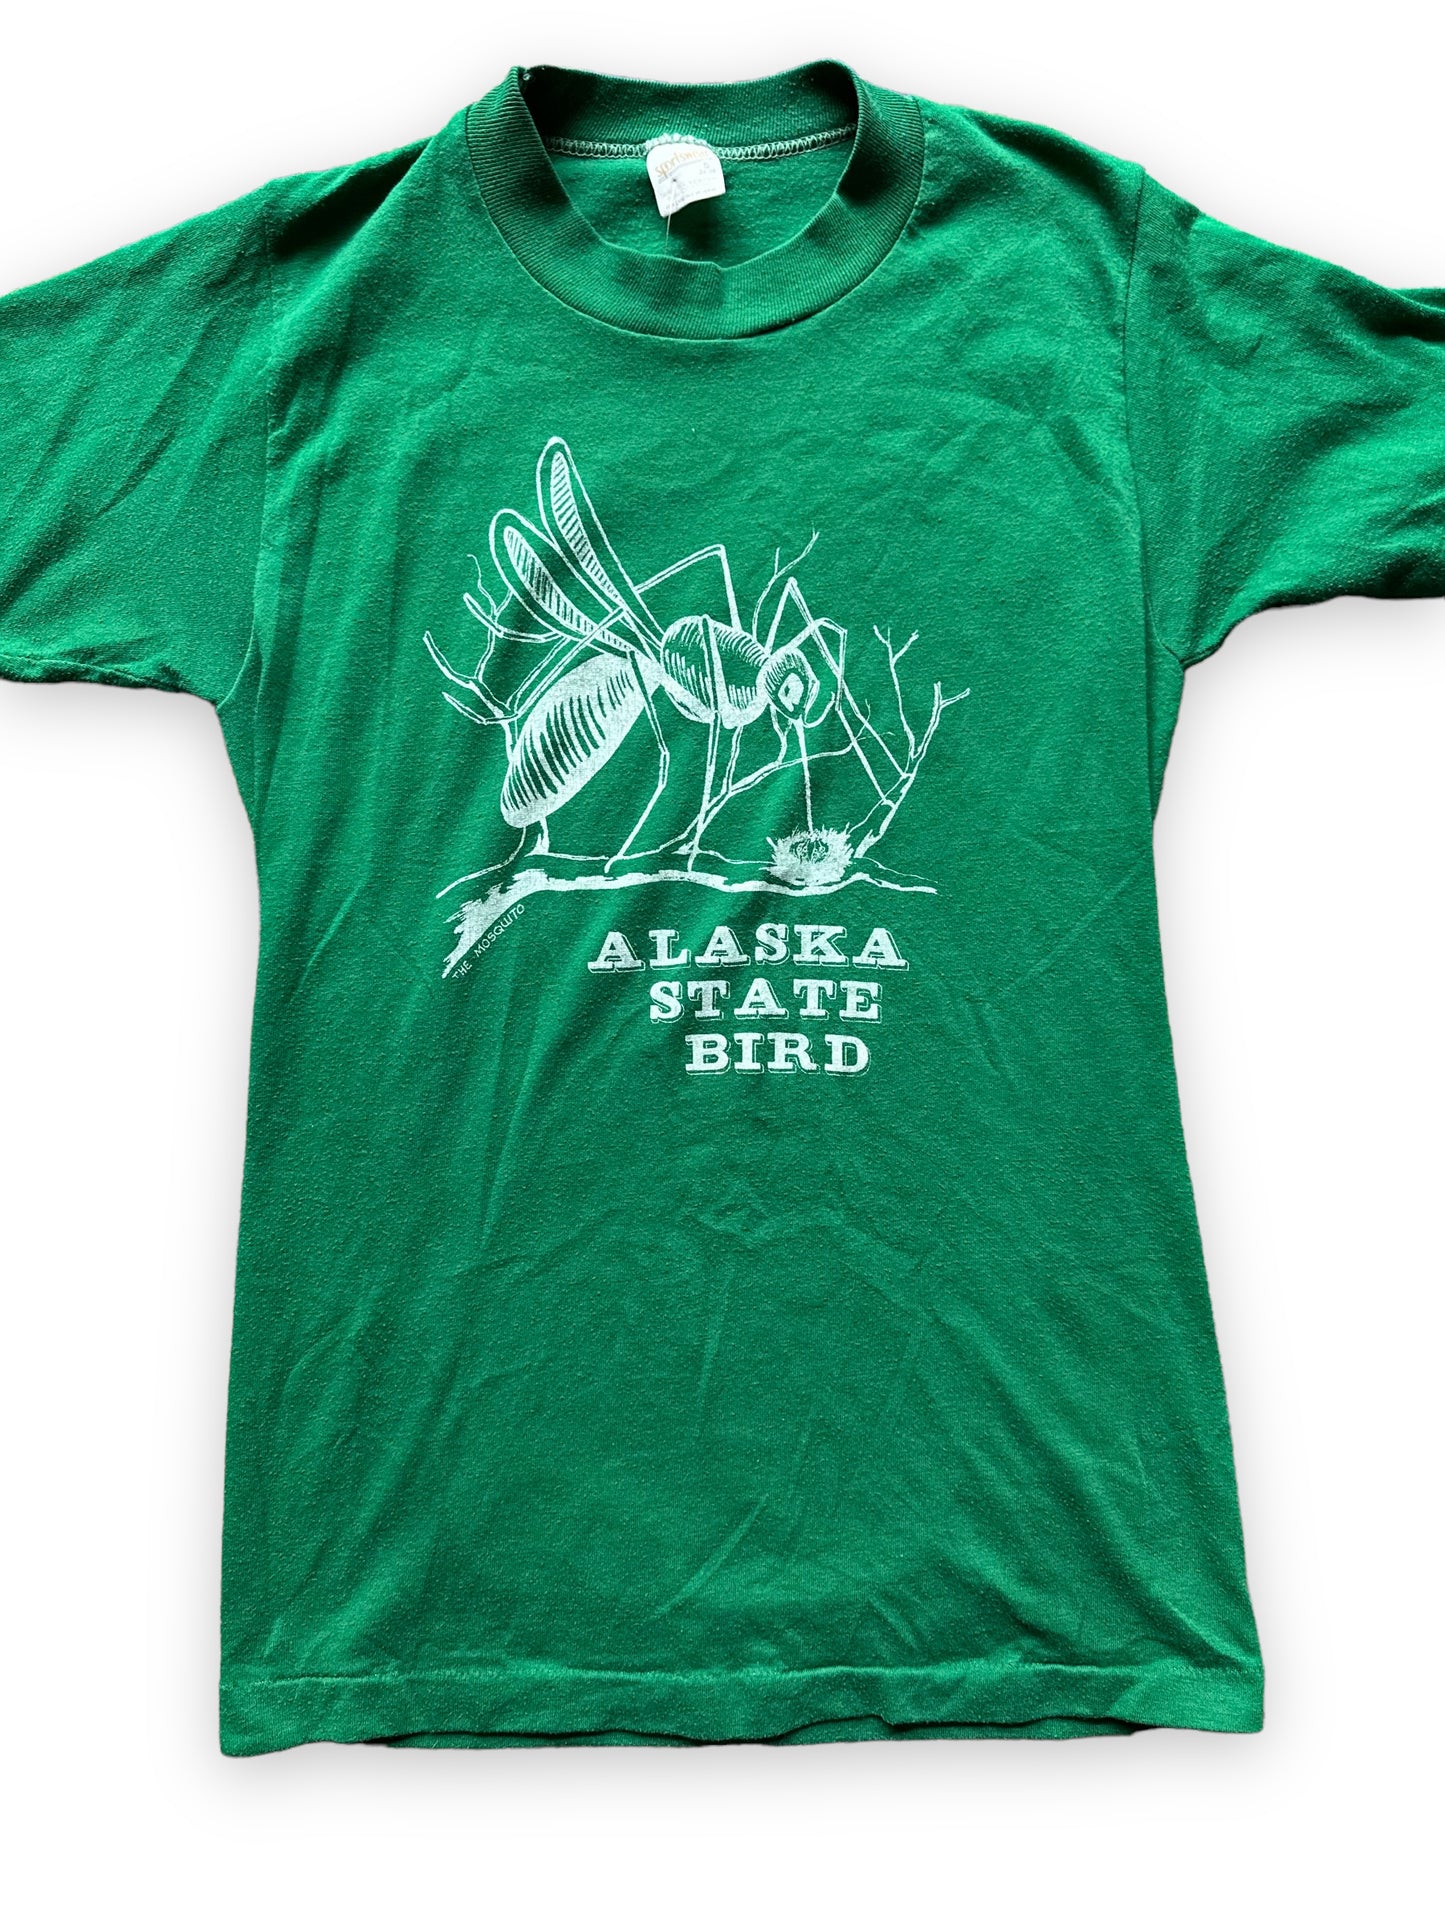 Front Graphic Close Up on Vintage Alaska State Bird Mosquito Tee SZ SM |  Vintage T Shirt Seattle | Barn Owl Vintage Seattle